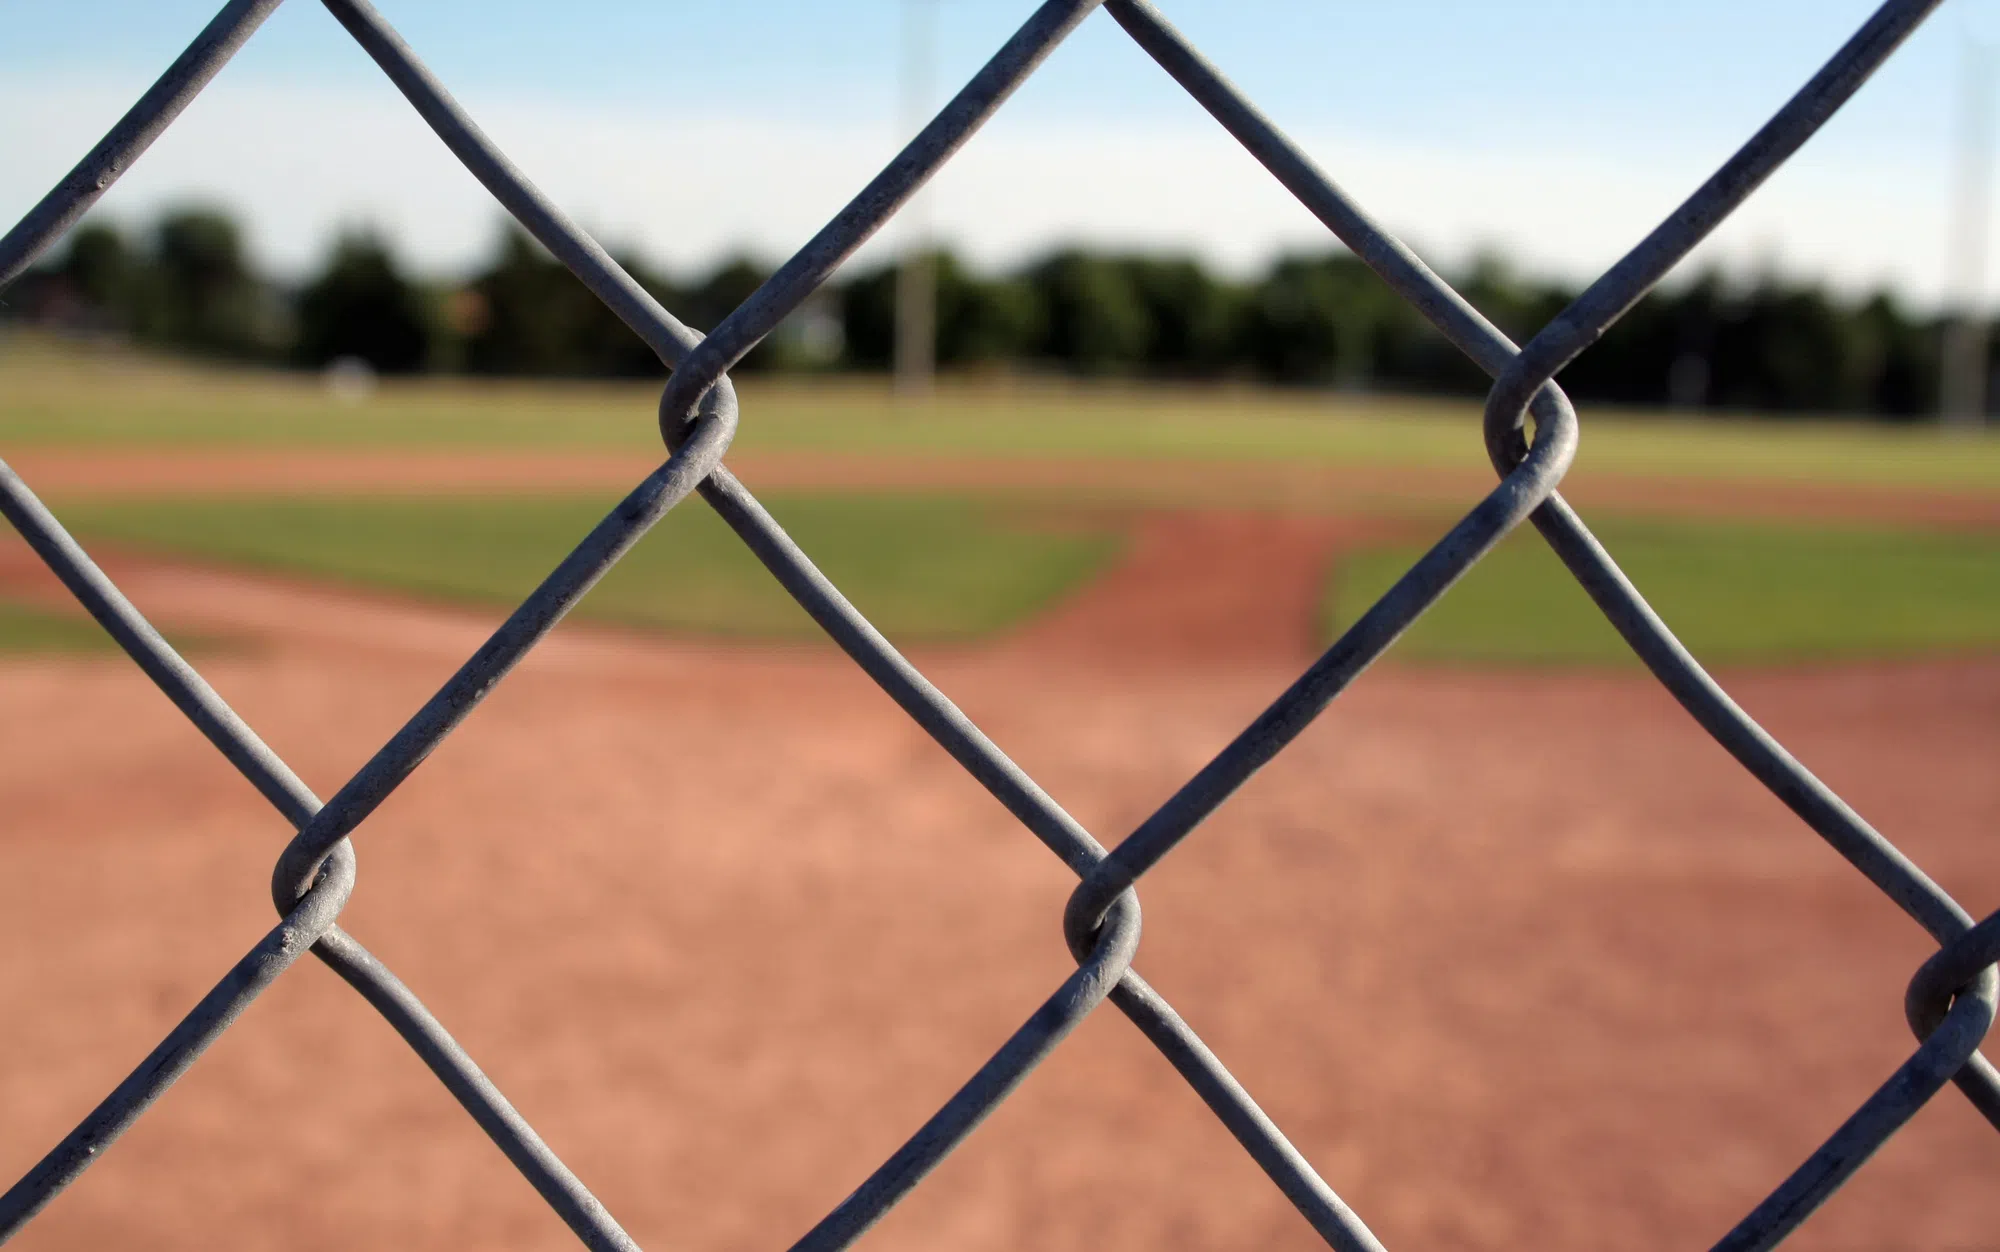 Increased interest in slo-pitch this summer in Greater Moncton